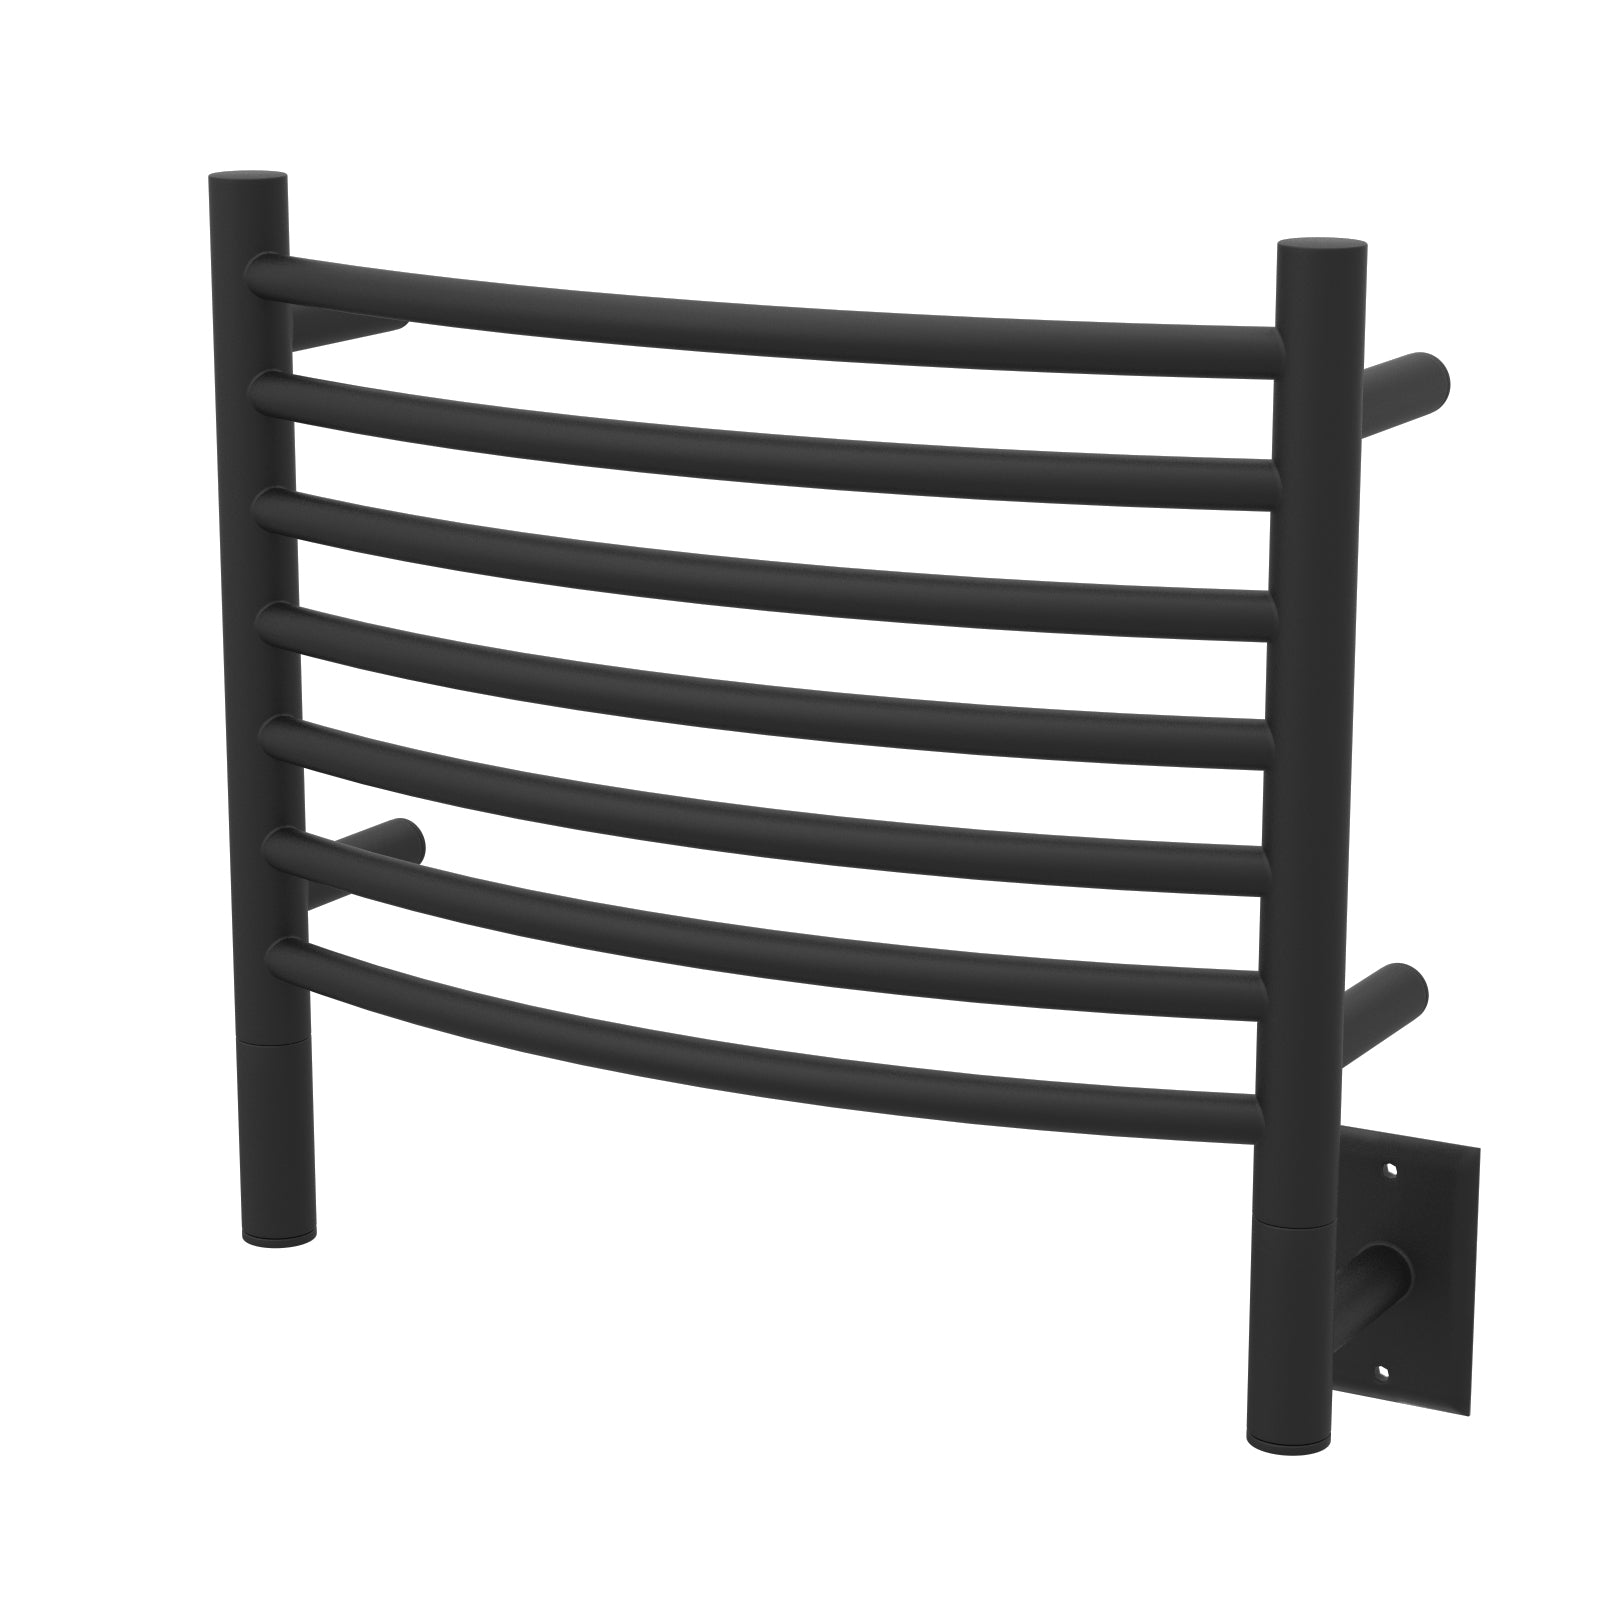 Amba Jeeves Model H Curved 7 Bar Hardwired Towel Warmer